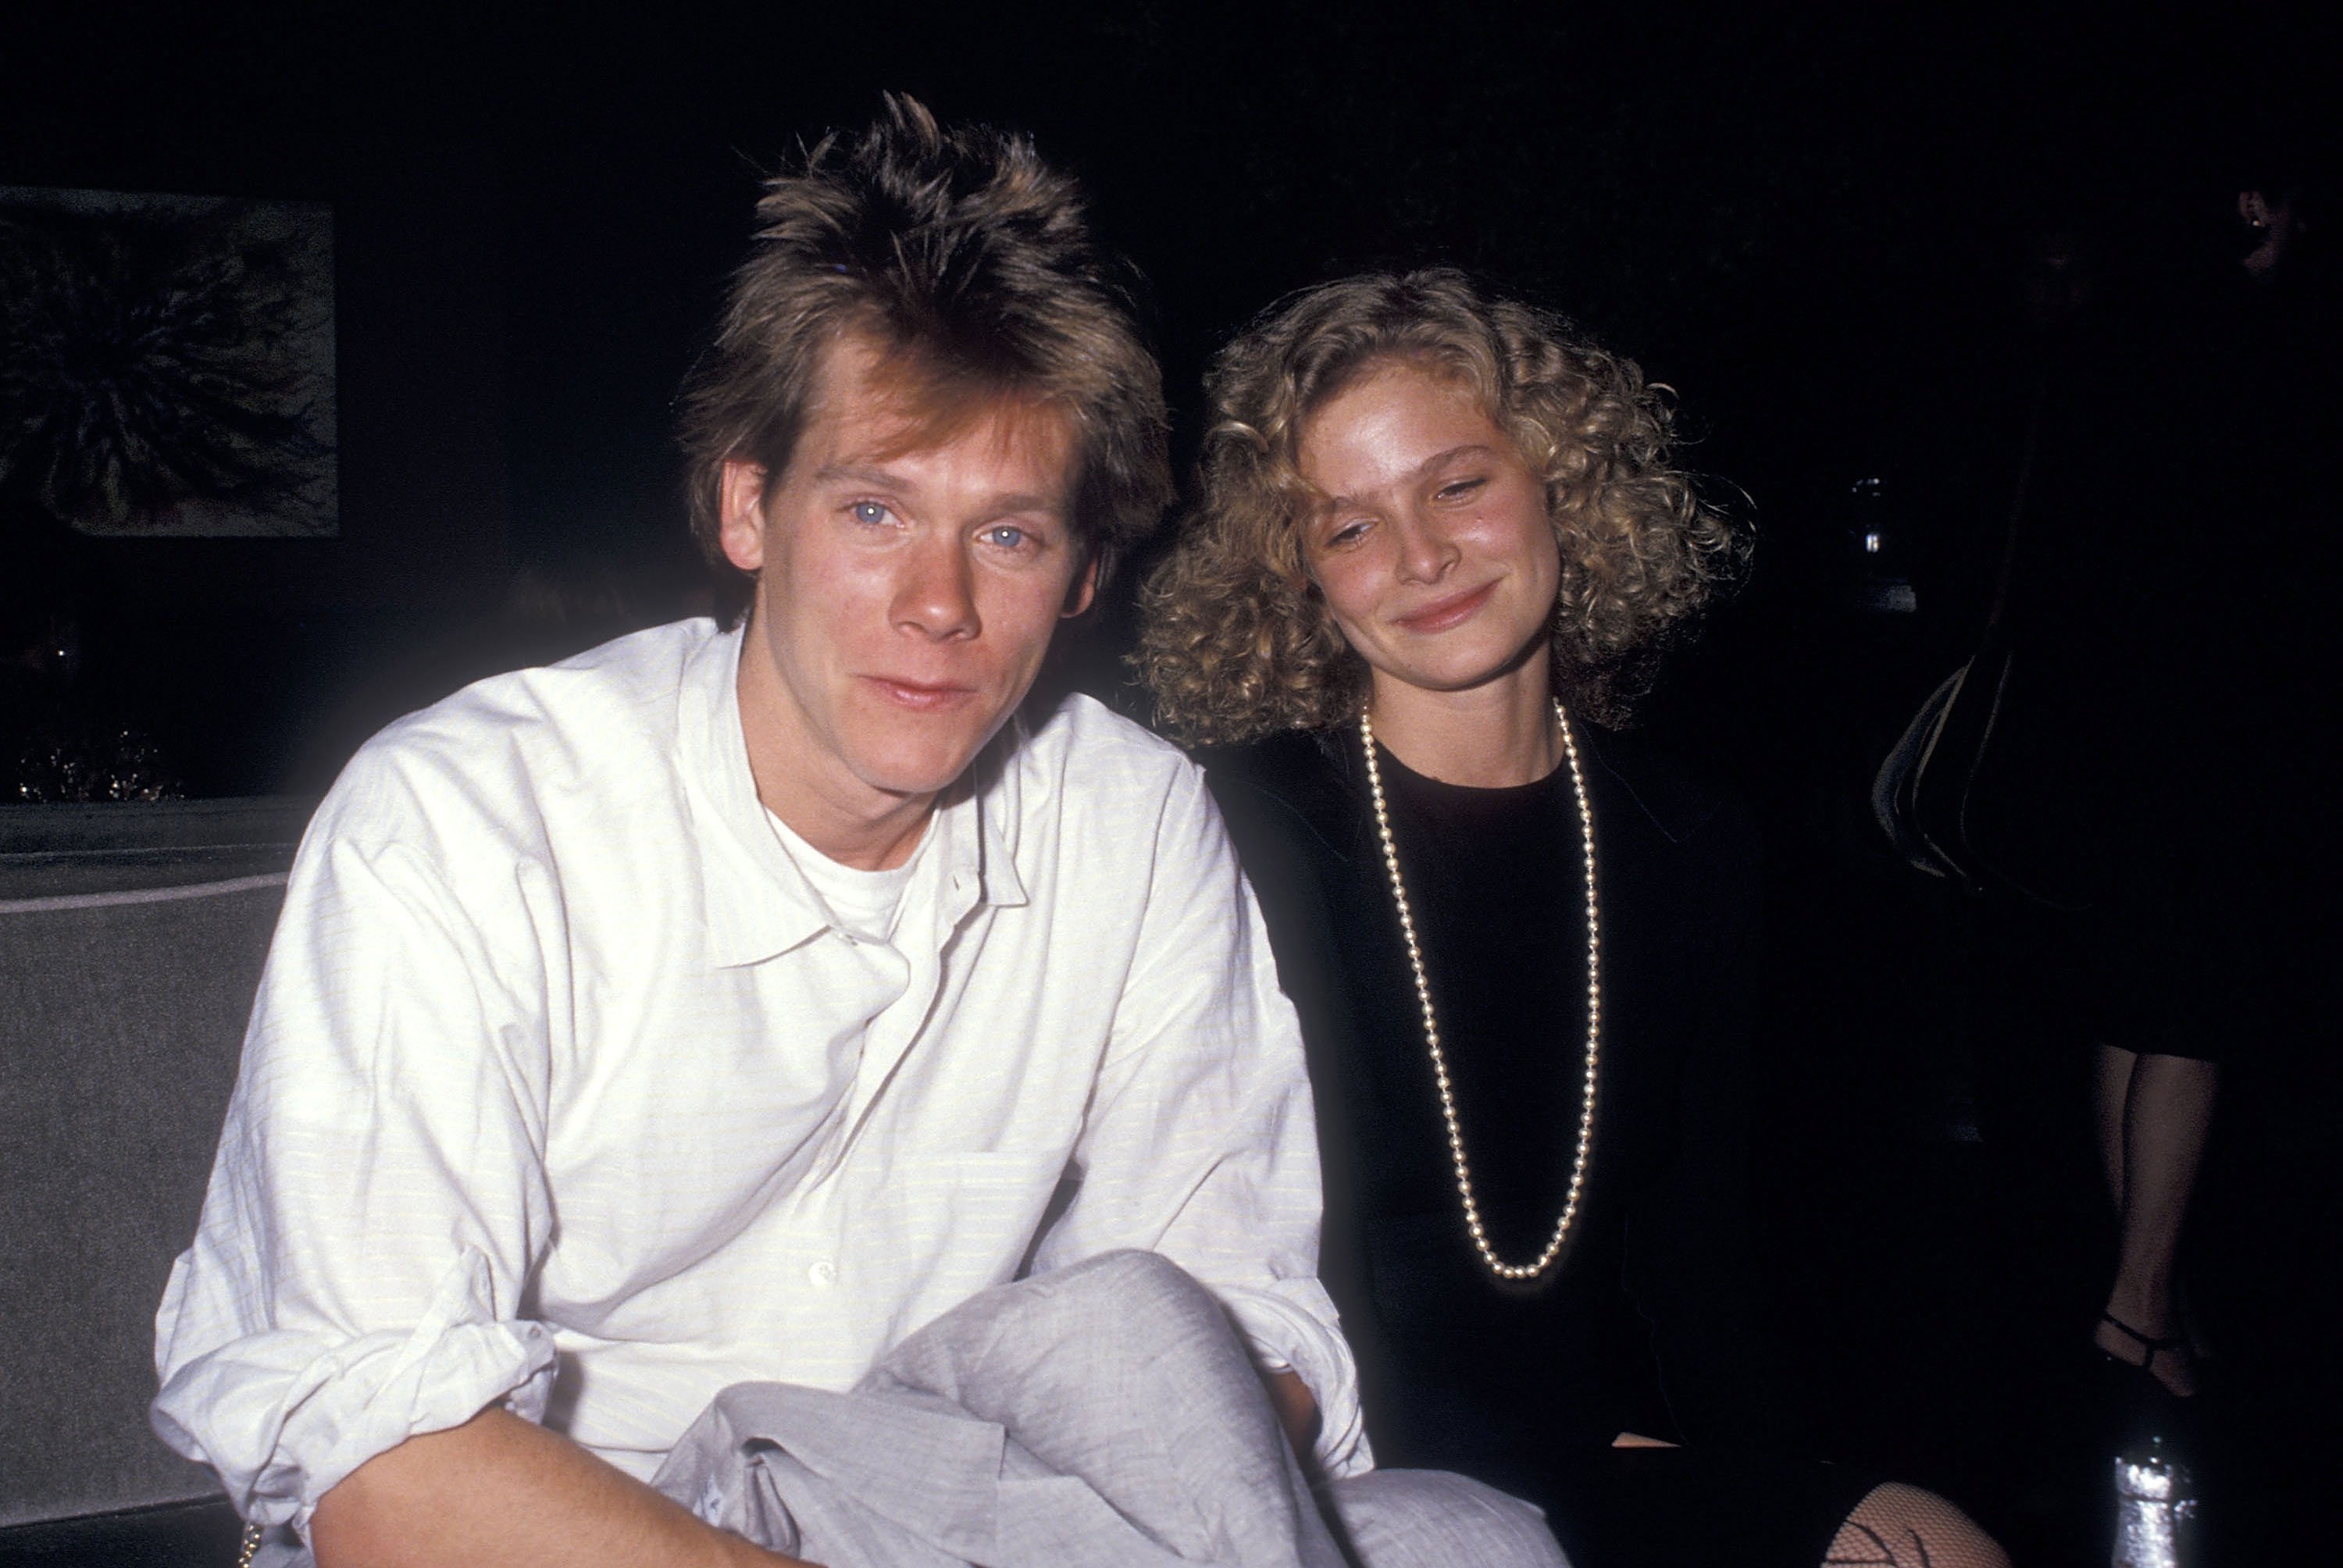 Kevin Bacon and Kyra Sedgwick Reveal How They’ve Stayed Married So Long